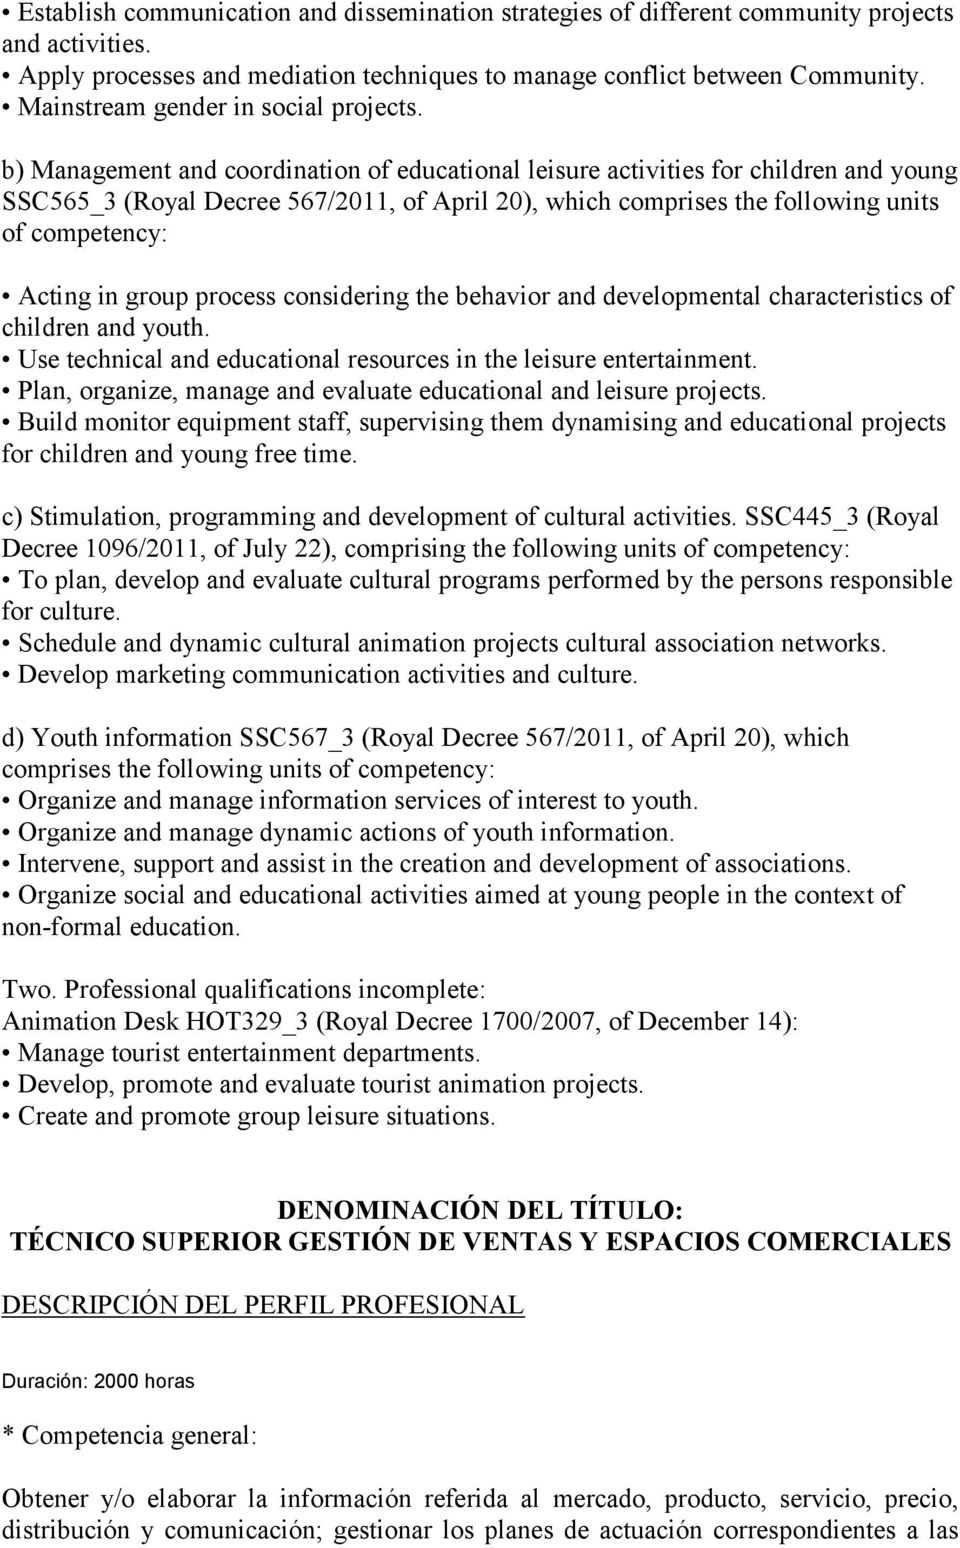 b) Management and coordination of educational leisure activities for children and young SSC565_3 (Royal Decree 567/2011, of April 20), which comprises the following units of competency: Acting in